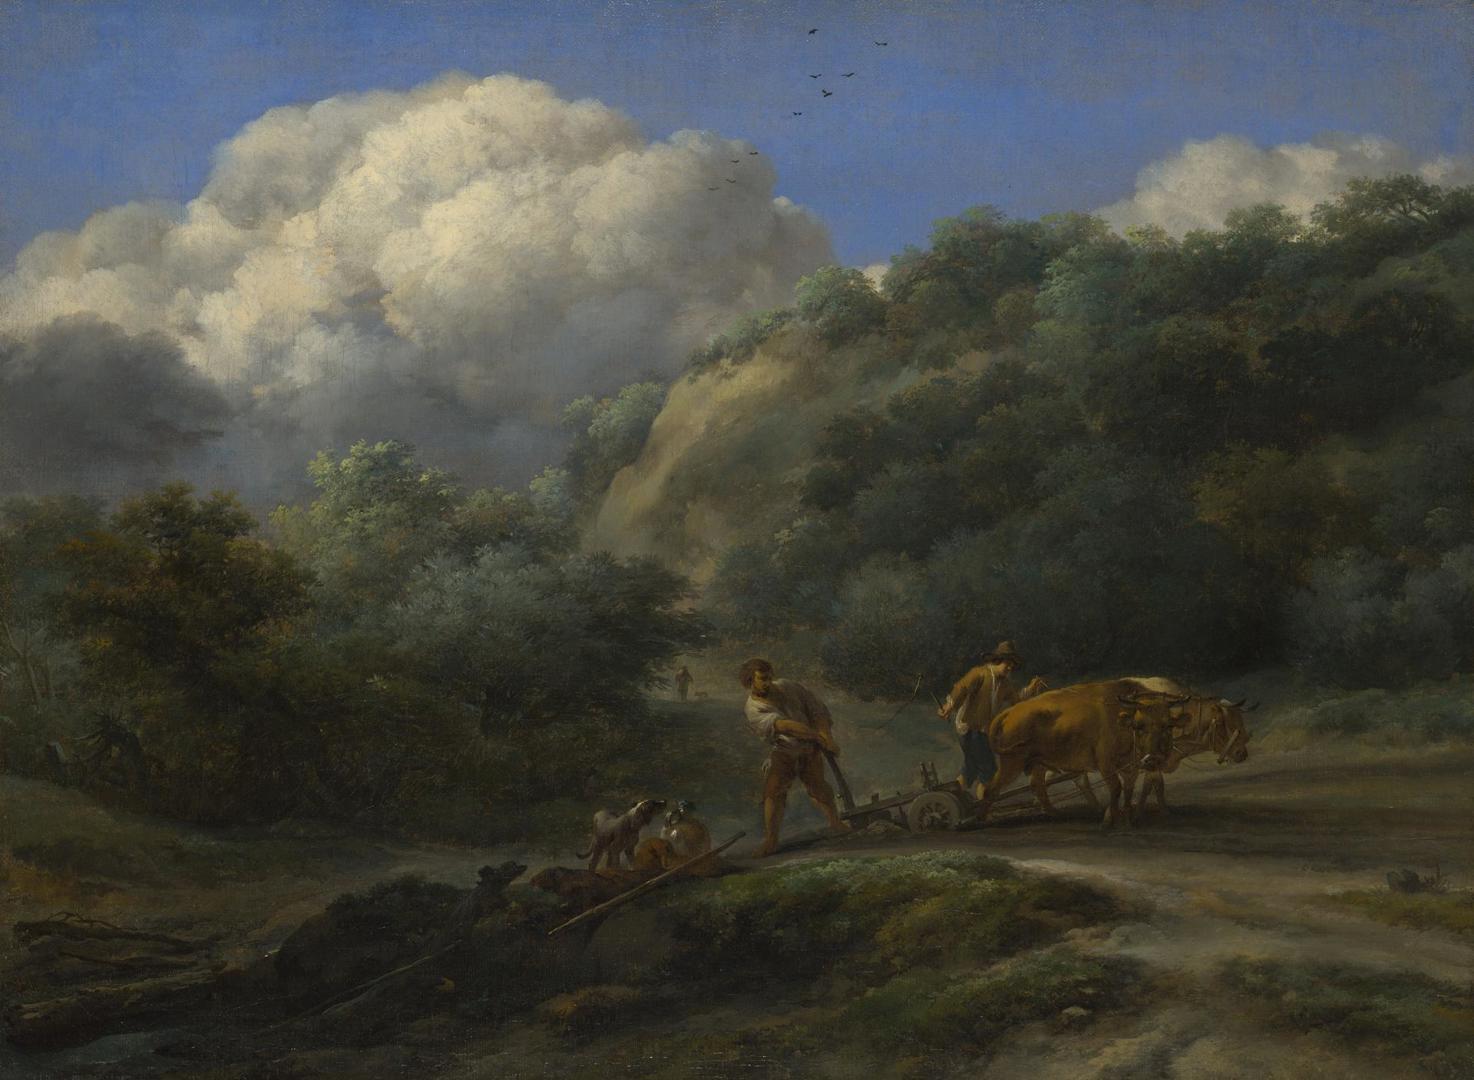 A Man and a Youth ploughing with Oxen by Nicolaes Berchem